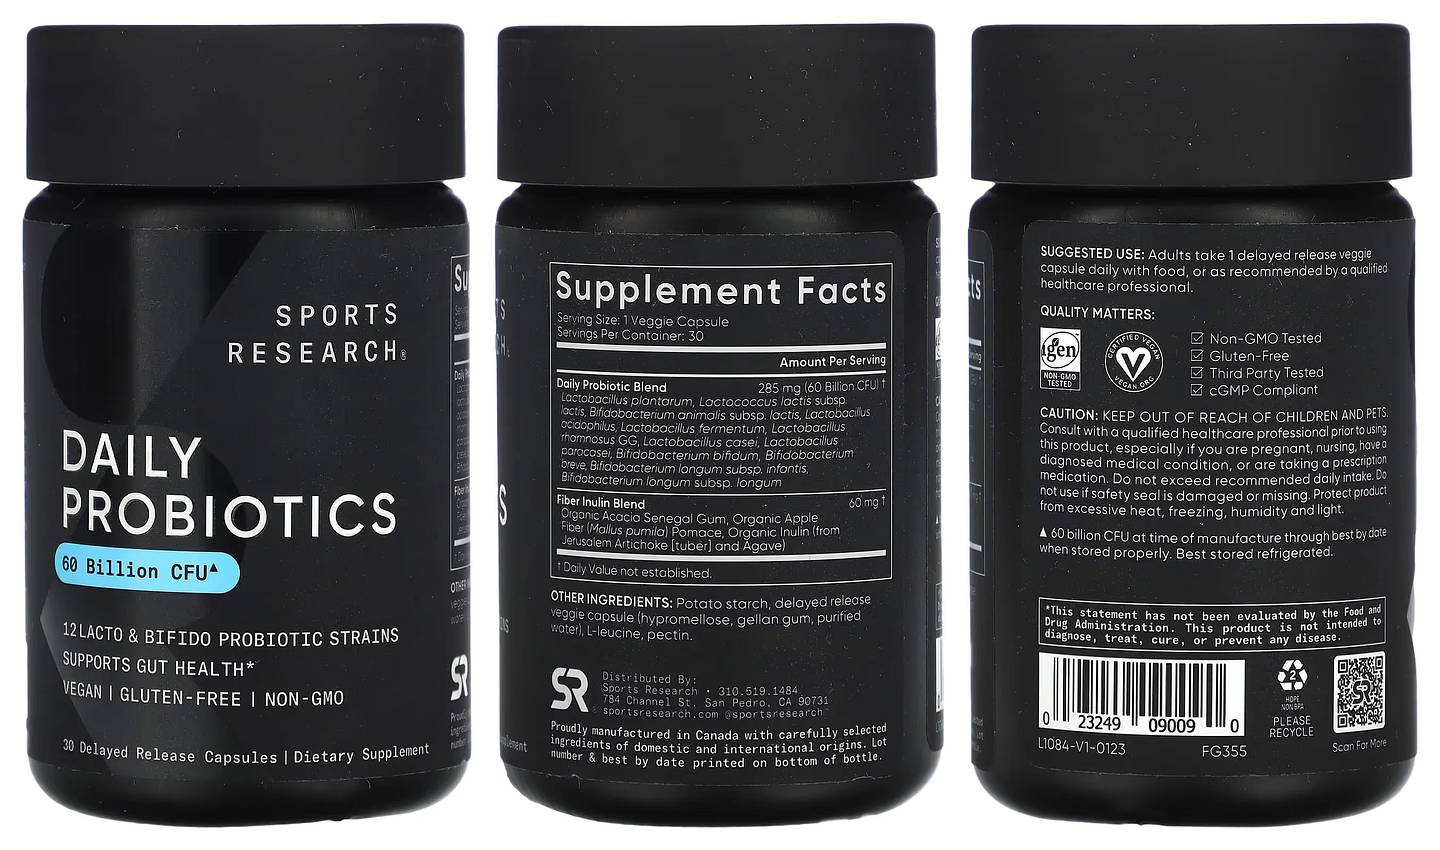 Sports Research, Daily Probiotics packaging